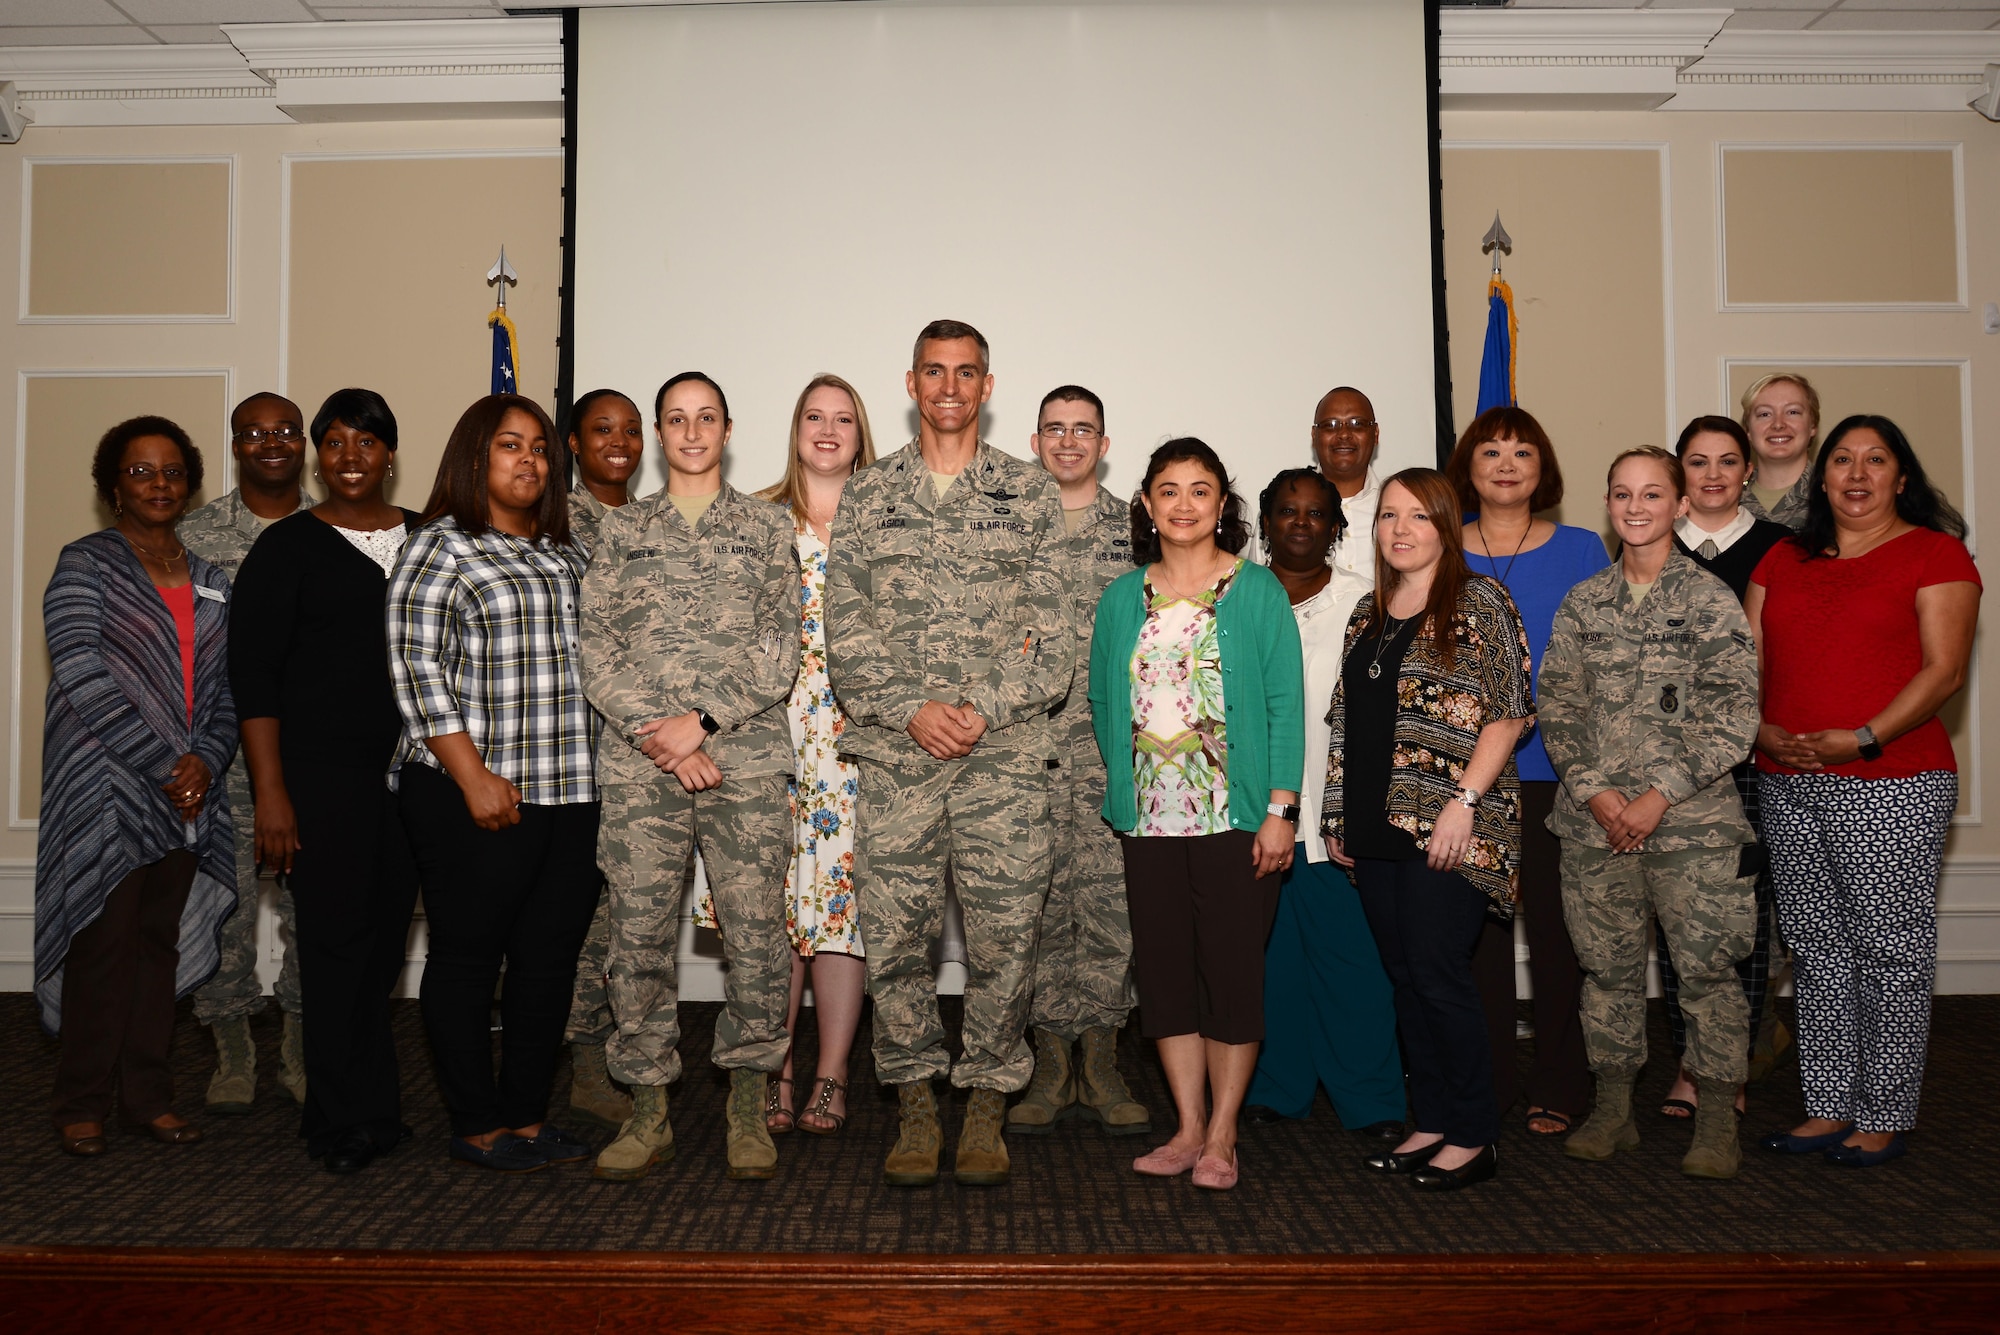 U.S. Air Force Col. Daniel Lasica, 20th Fighter Wing commander, center, stands with Team Shaw volunteers during a volunteer appreciation breakfast at Shaw Air Force Base, S.C., April 13, 2017. Volunteers contributed their time to organizations such as Shaw’s Attic, Key Spouse Program, and youth sports and academic programs. (U.S. Air Force photo by Airman 1st Class Kathryn R.C. Reaves)